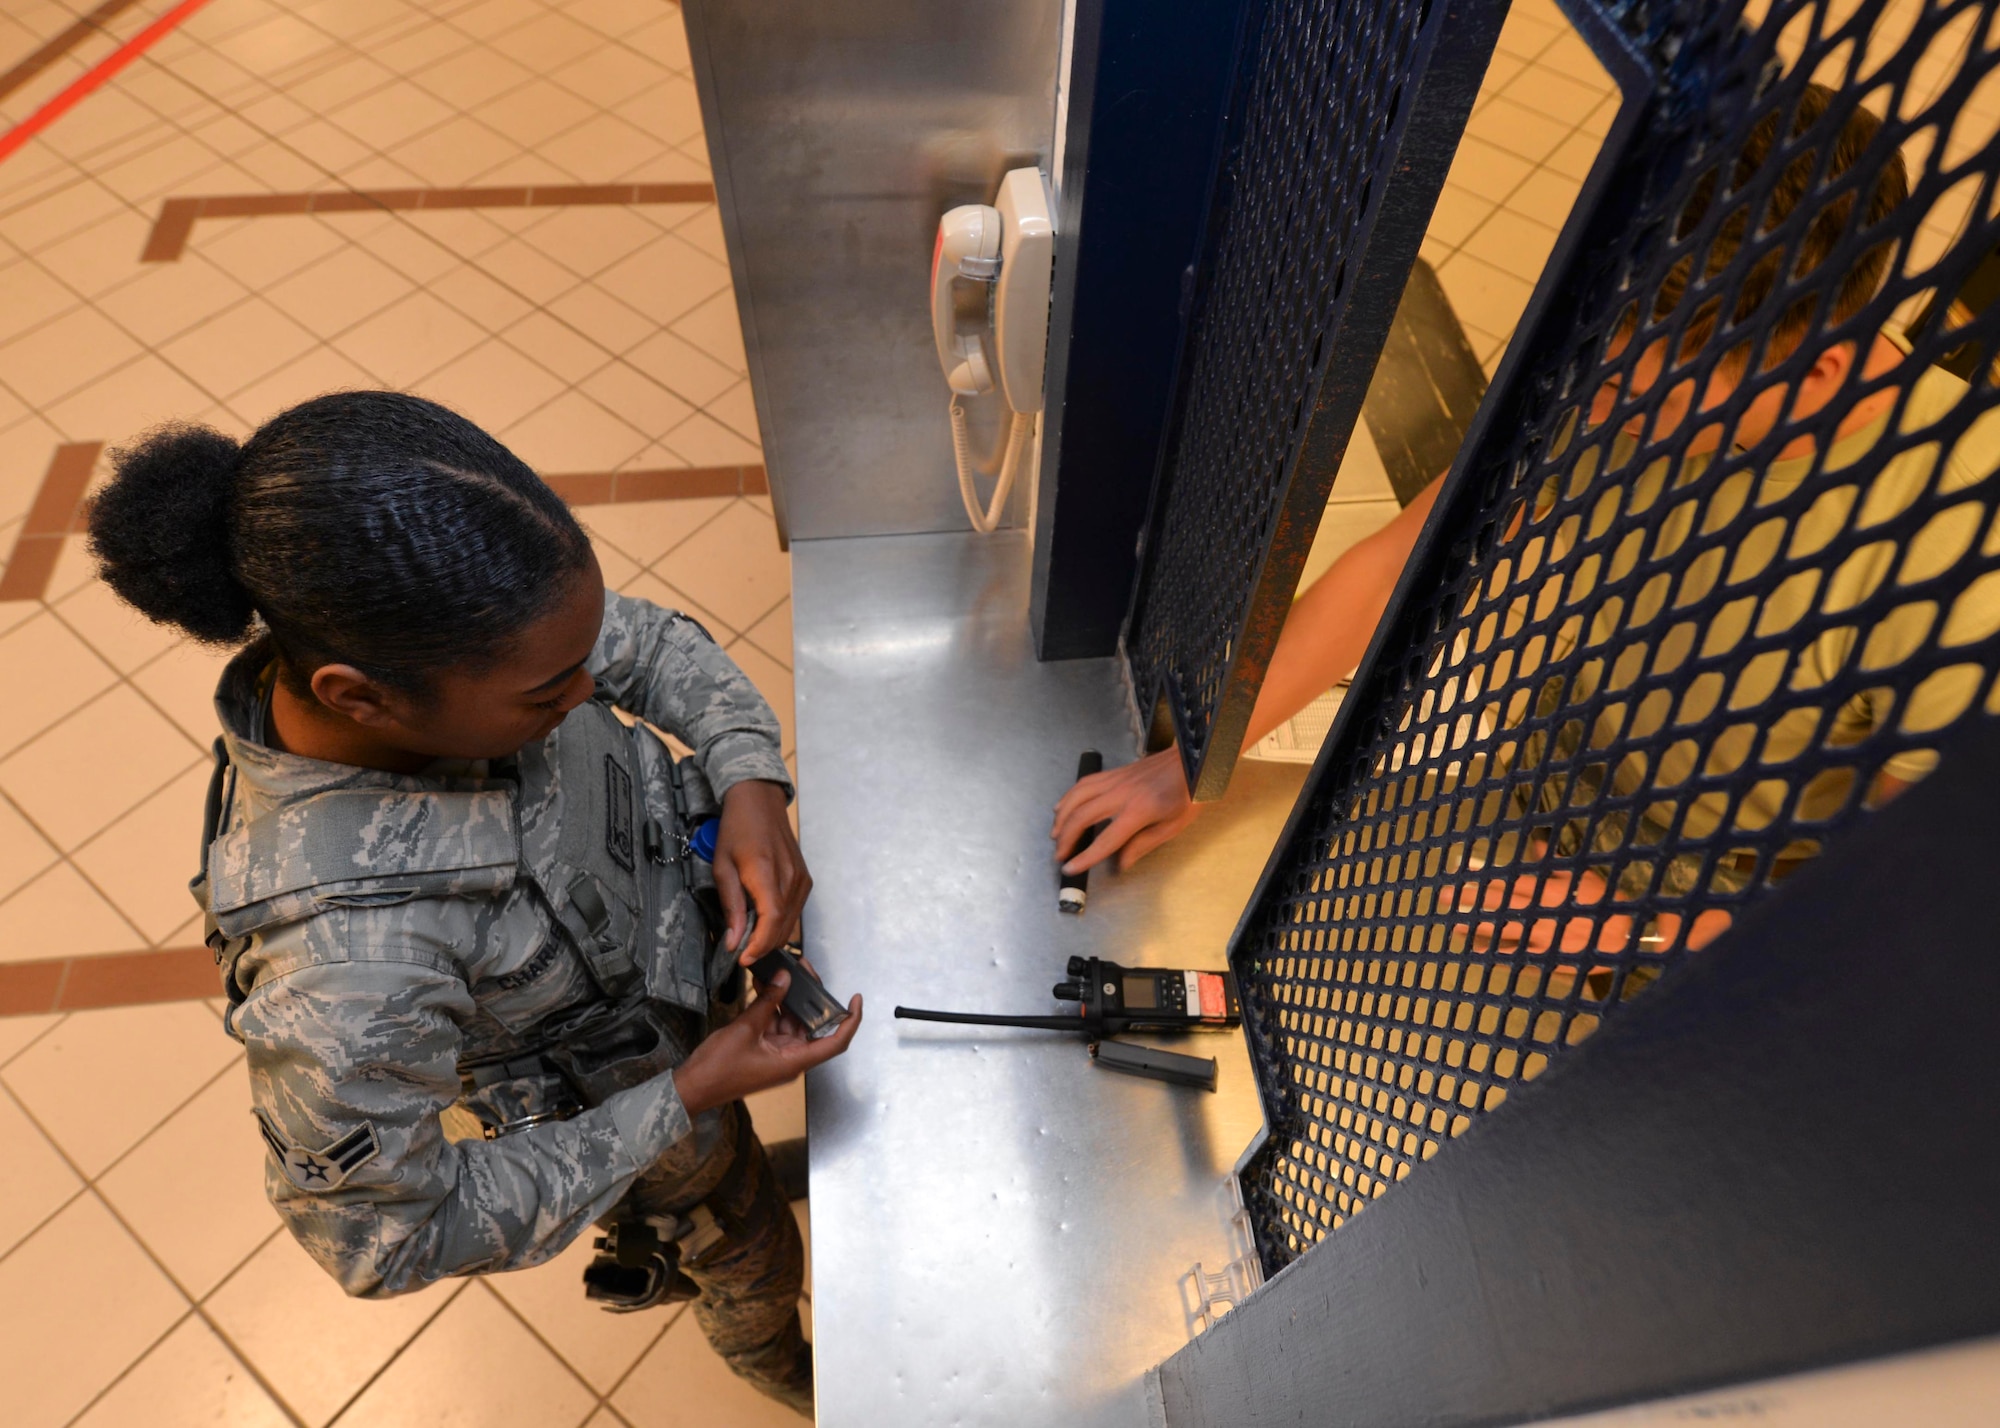 Airman 1st Class John Stumpf, an armorer assigned to the 28th Security Forces Squadron, equips Airman 1st Class Tkeyah Charley, a response force member assigned to the 28th SFS, with equipment at the armory at Ellsworth AFB, S.D., Oct. 25, 2016. Security forces Airmen have multiple levels of force available for daily use including the M4 carbine rifle, M9 pistol, batons and less-than-lethal weapons. (U.S. Air Force photo by Airman 1st Class Donald Knechtel)